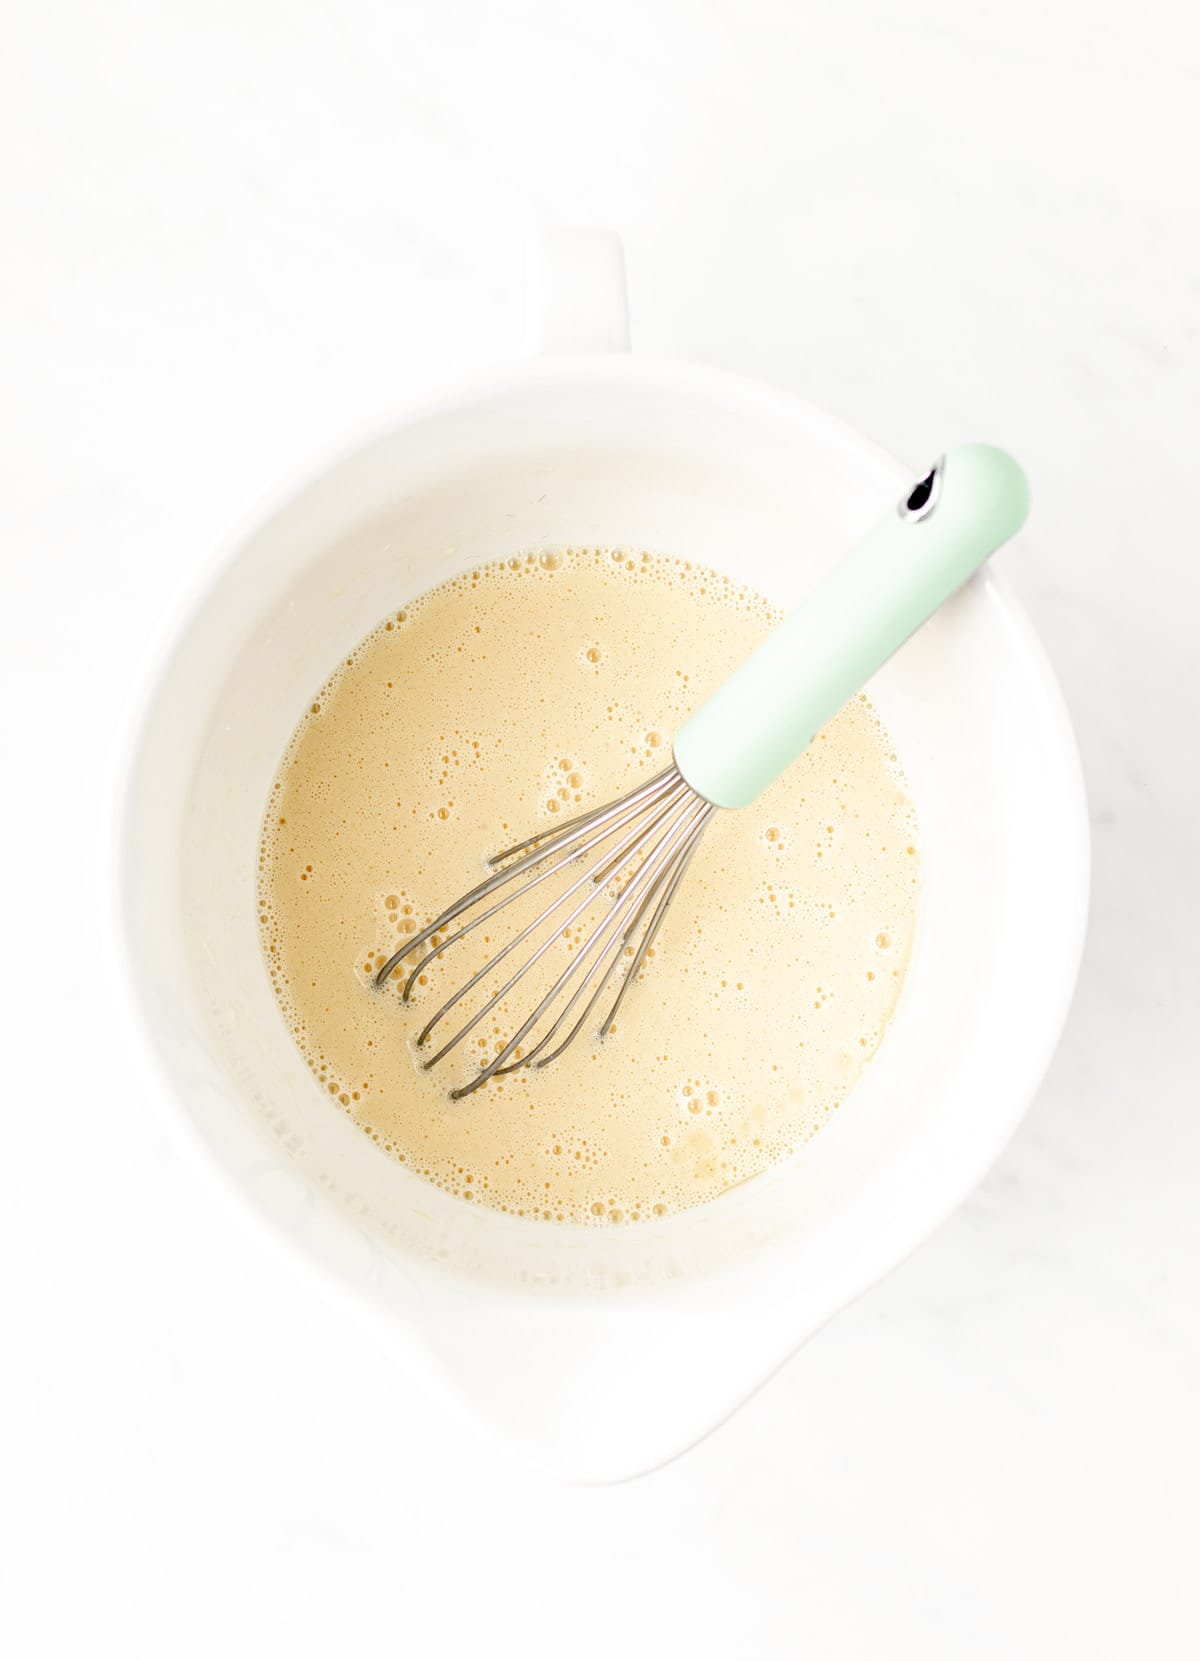 A whisk mixing together the wet ingredients for the pancakes in a white bowl.